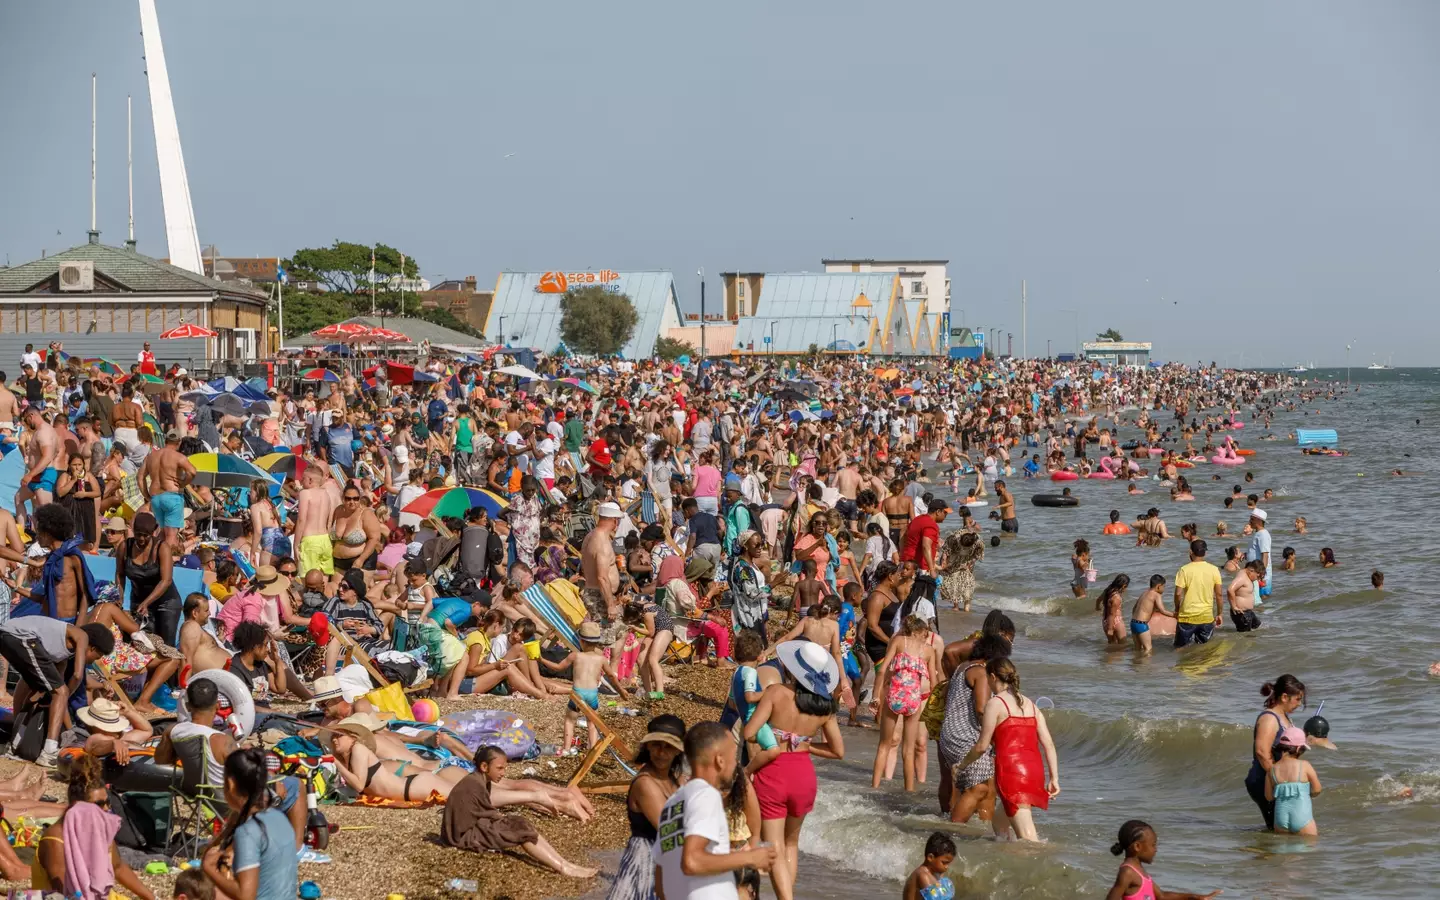 Brits are expected to flock to the beaches this weekend as the latest heatwave hits.